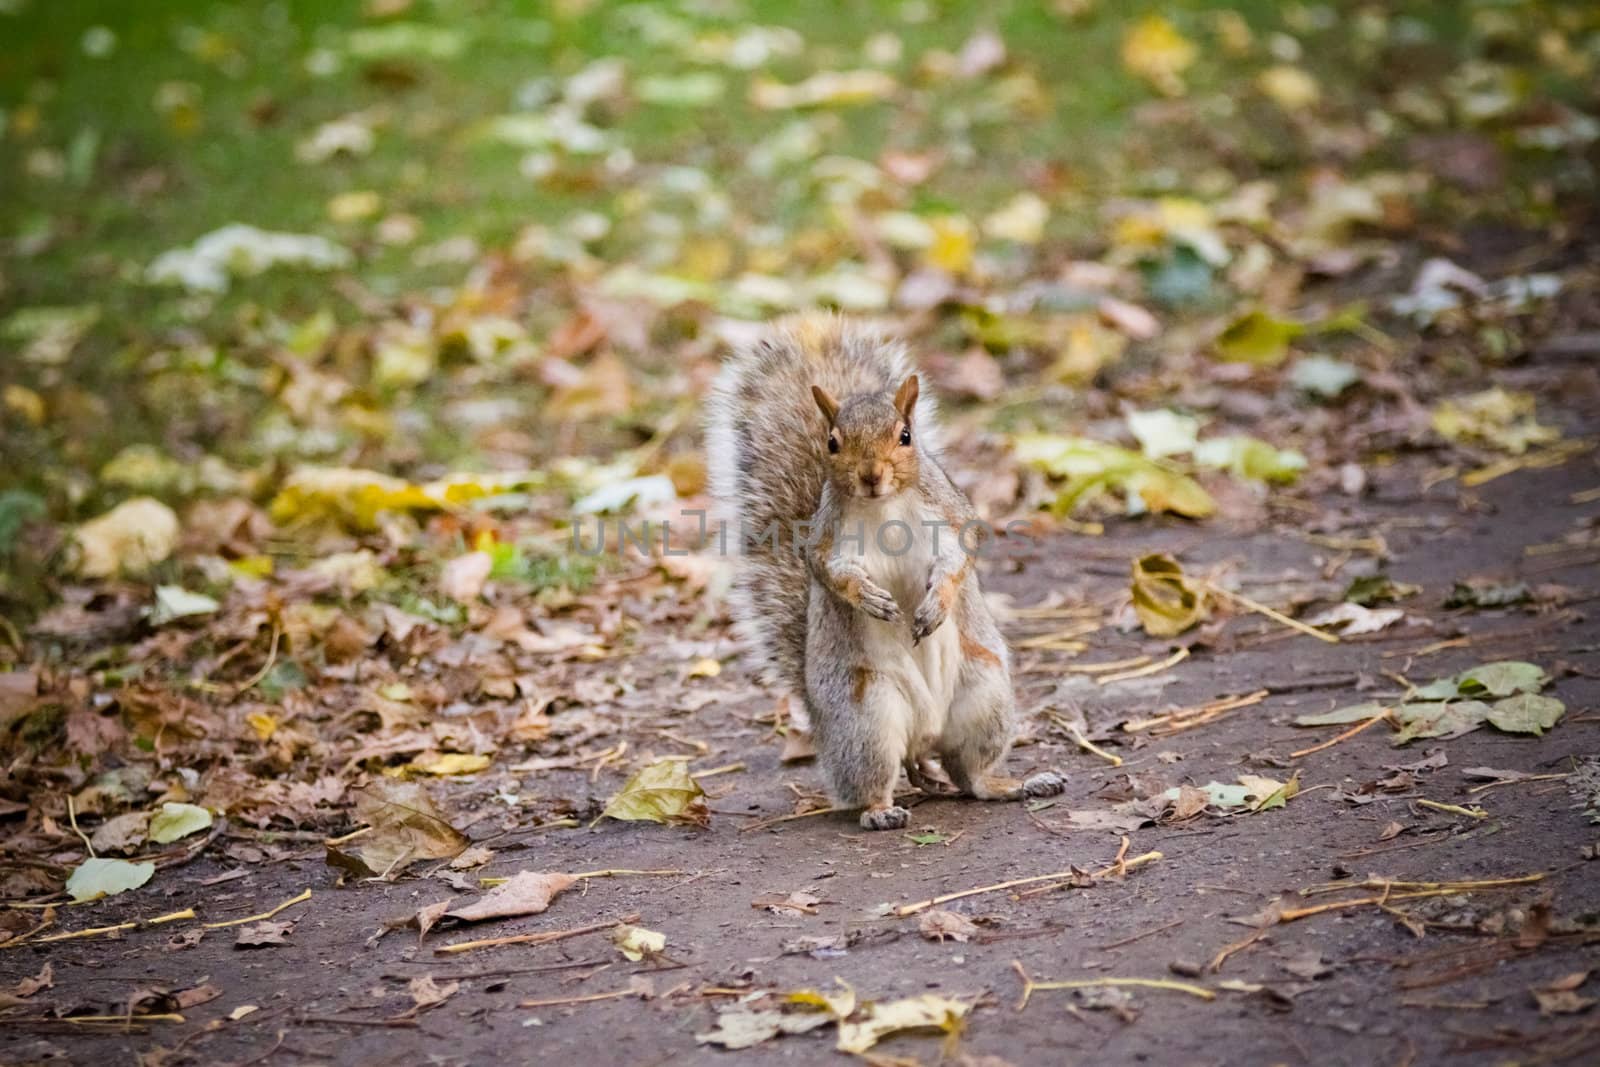 Squirrel standing in the forest and looking at the camera